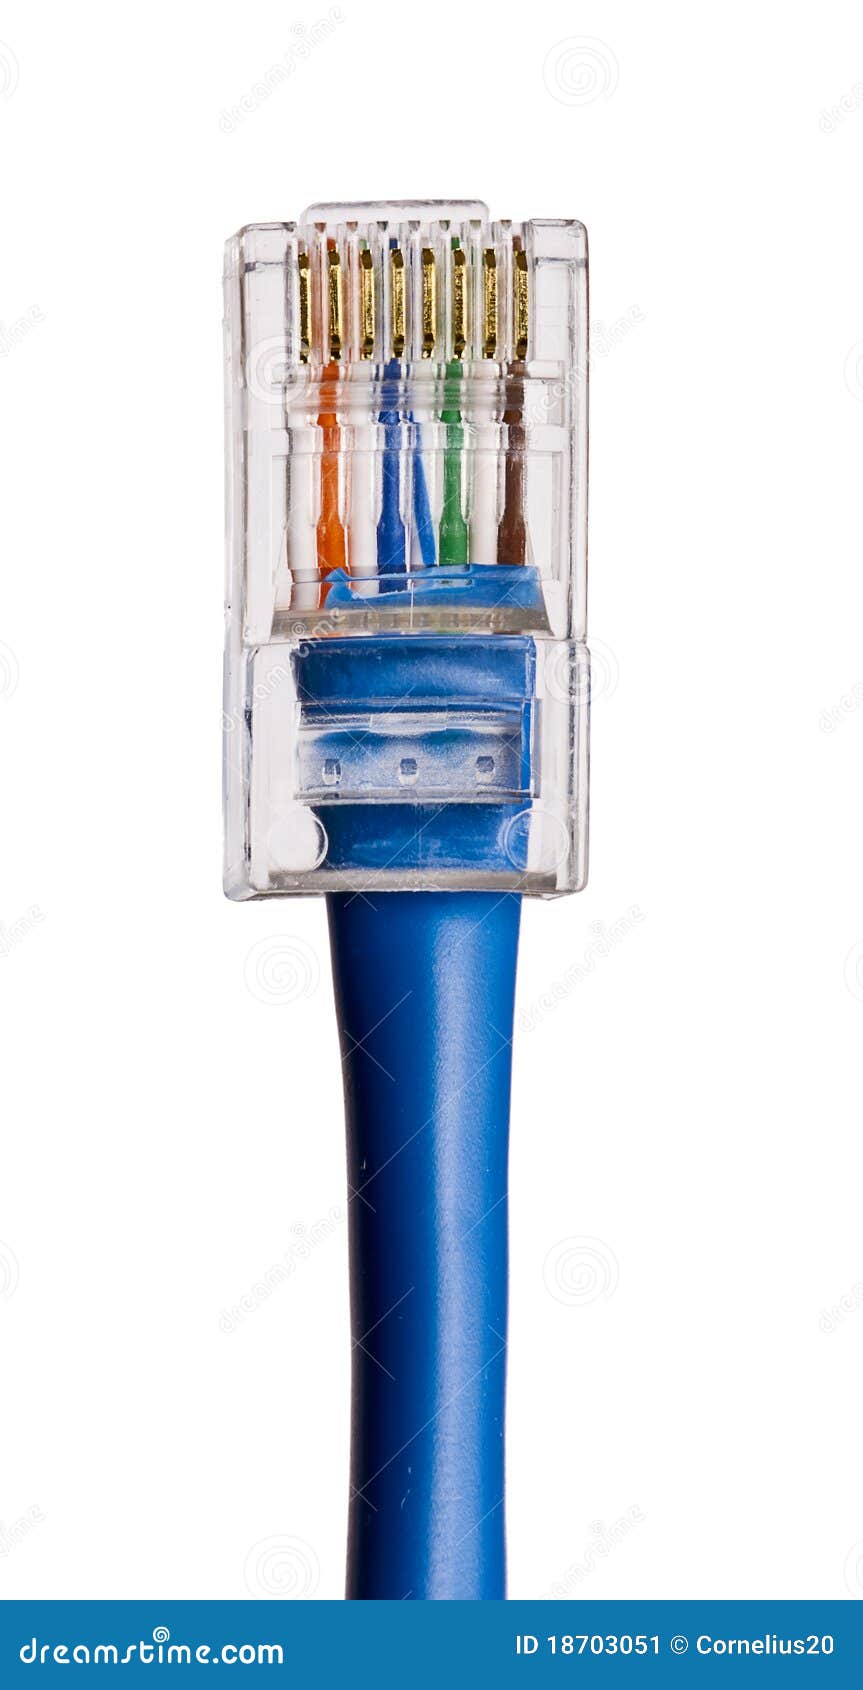 Internet cable stock image. Image of blue, background ...